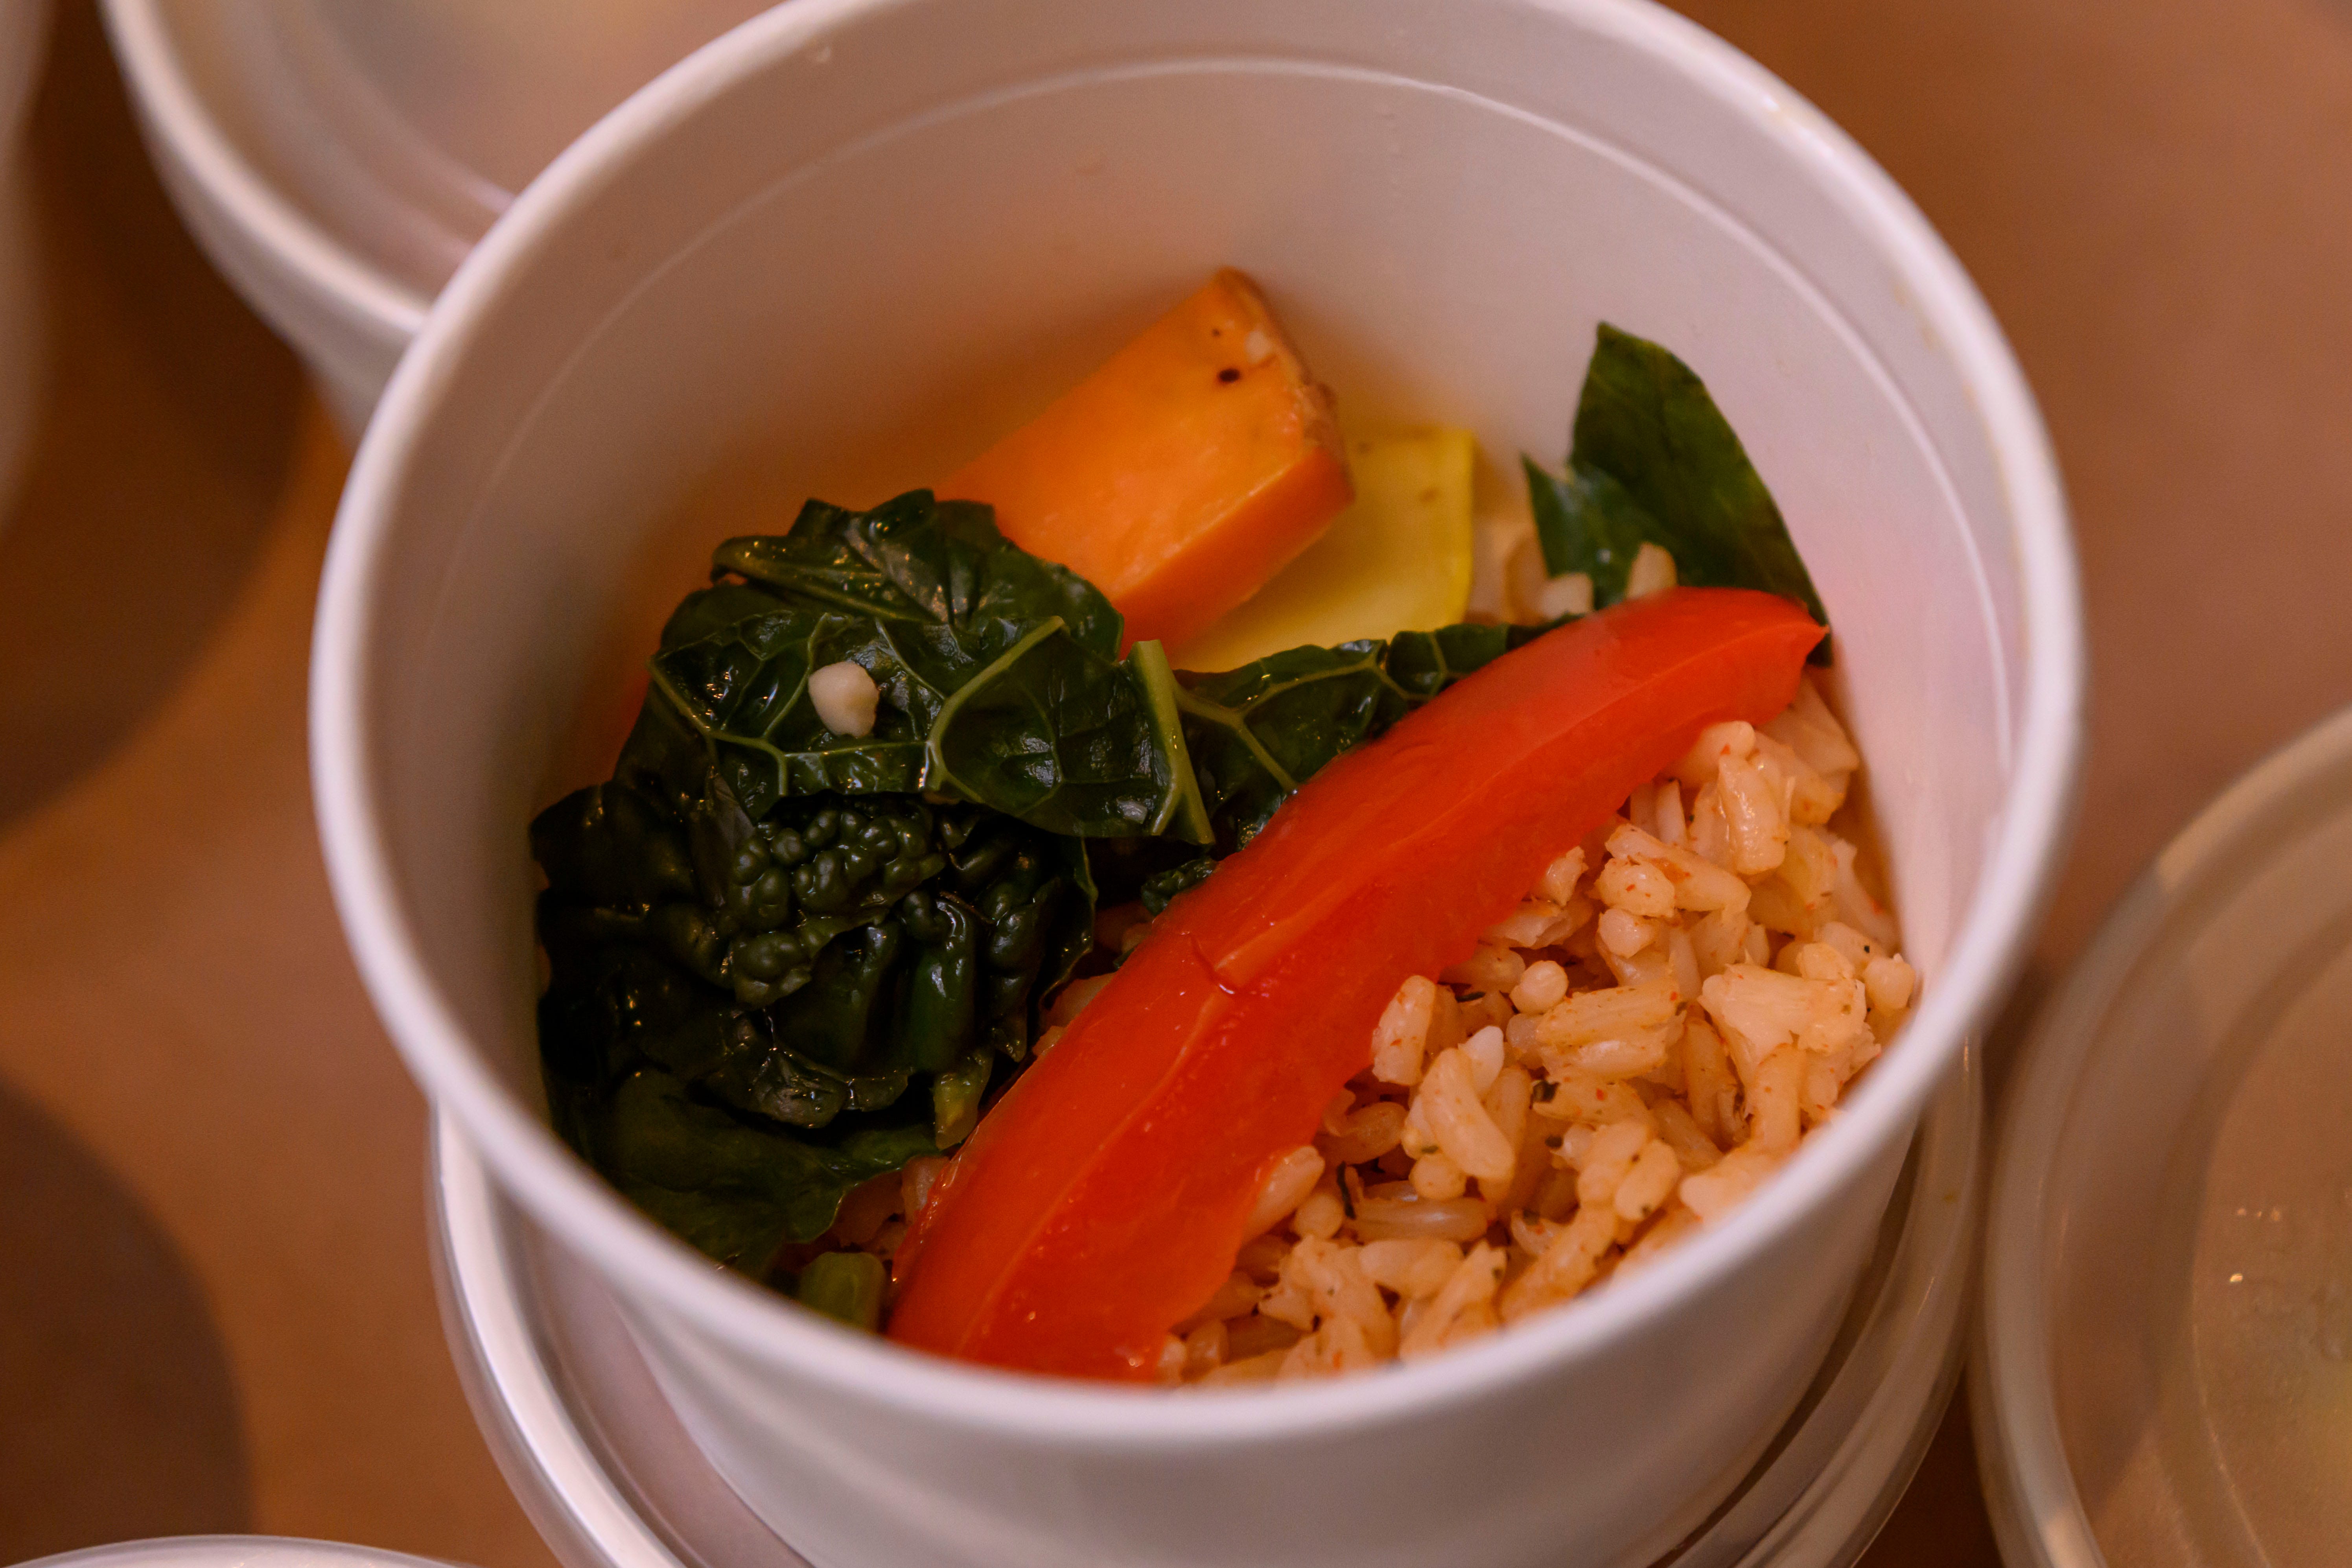 Sweet potato, squash, and braised greens bowl made by chef Ryan Salter from Breadless, during the event series Dish and Design, at the Berman Center for Performing Arts, in West Bloomfield, March 20, 2024.